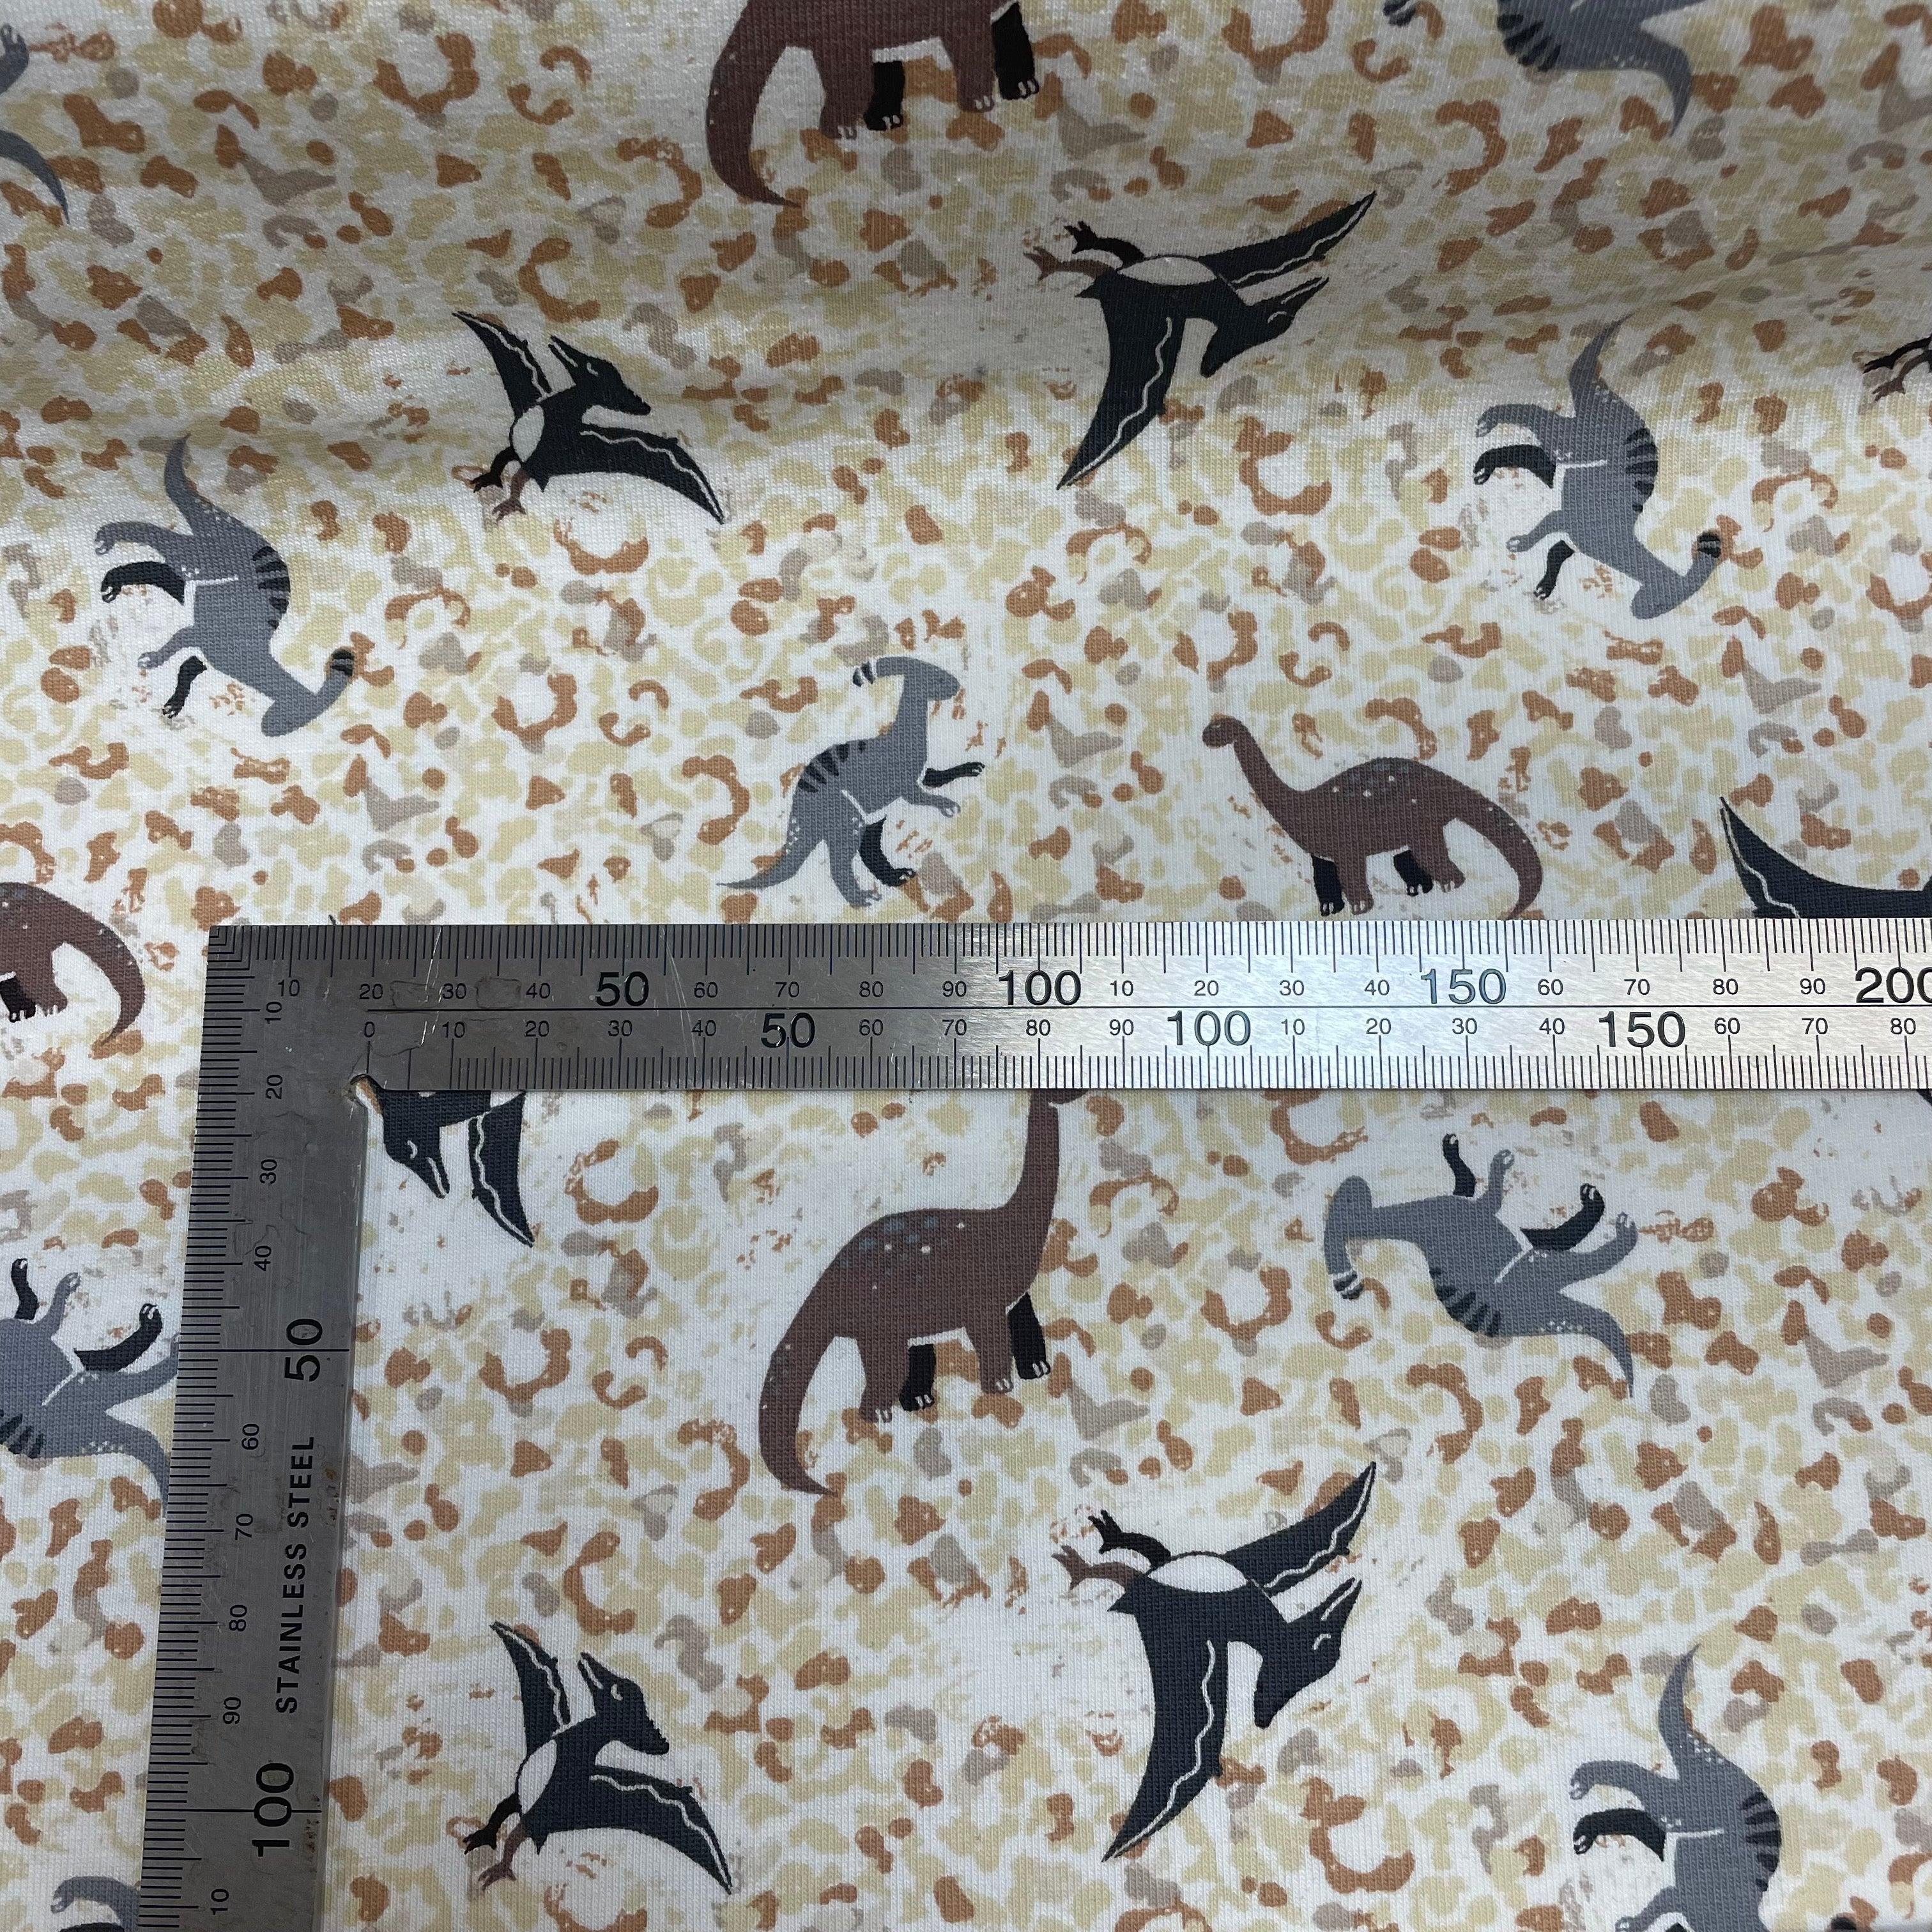 Small Dinosaurs on Sand texture Cotton Jersey Fabric